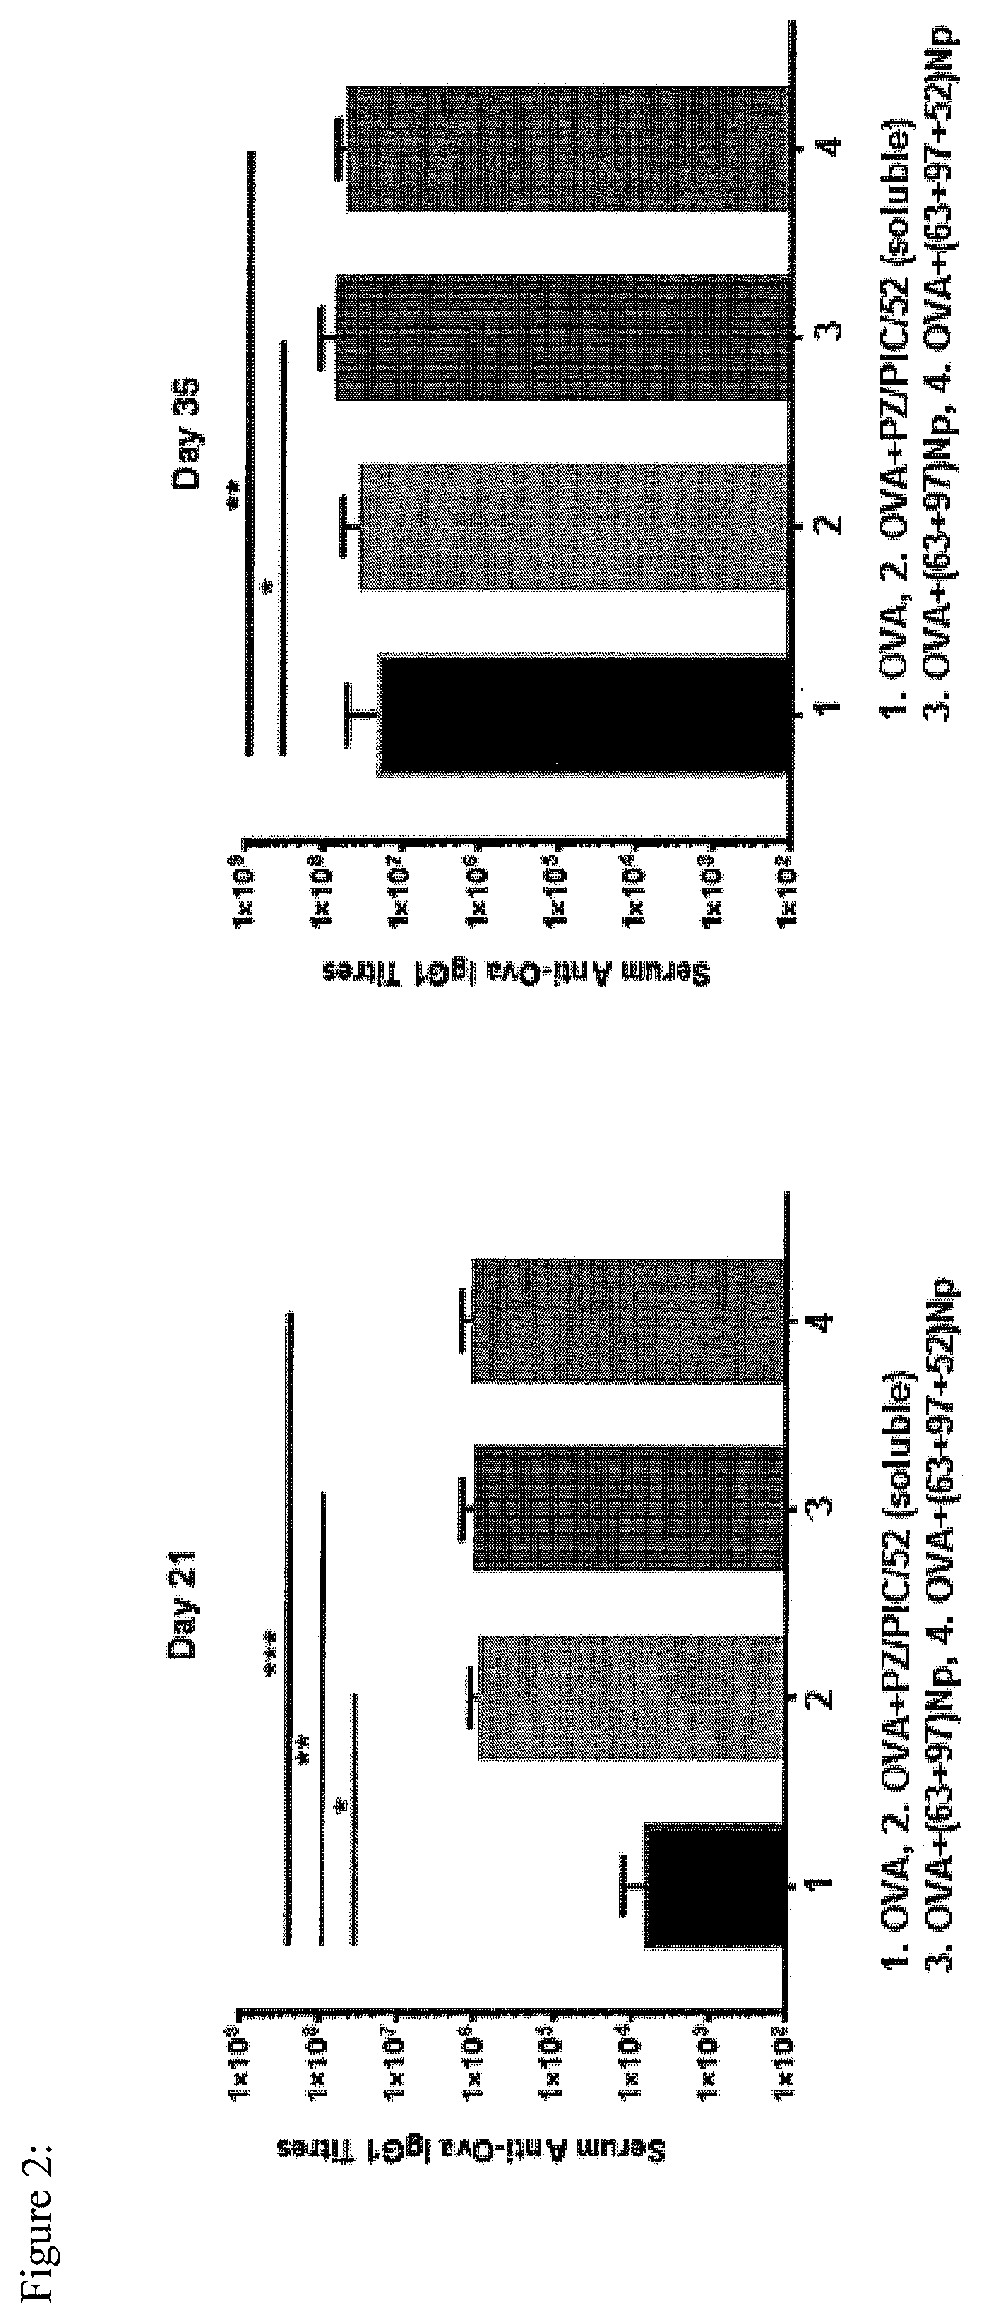 Synthetic innate immune receptor ligands and uses thereof